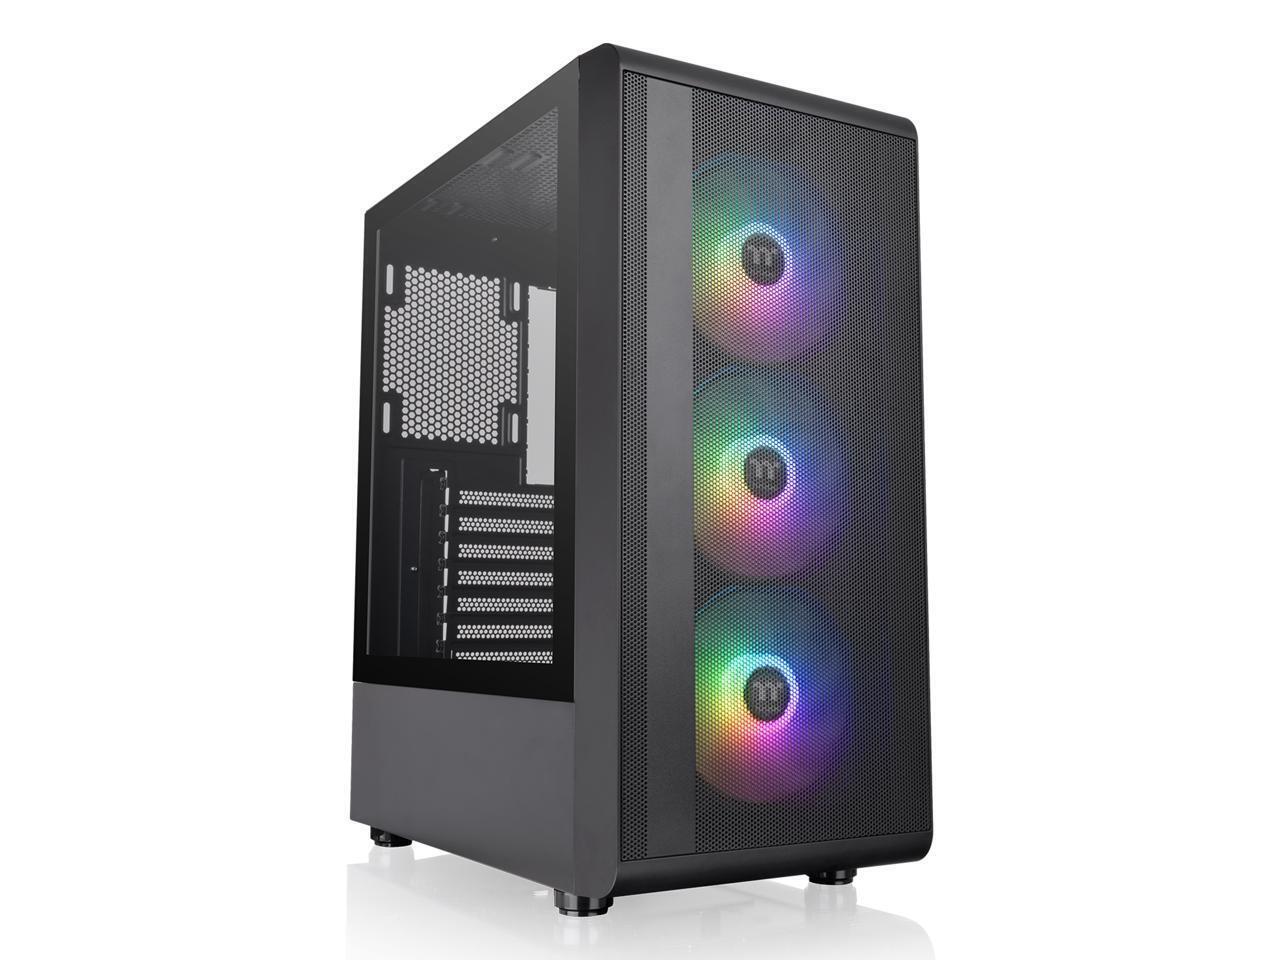 Thermaltake S200 TG Black ATX Mid Tower ARGB Tempered Glass Computer Chassis